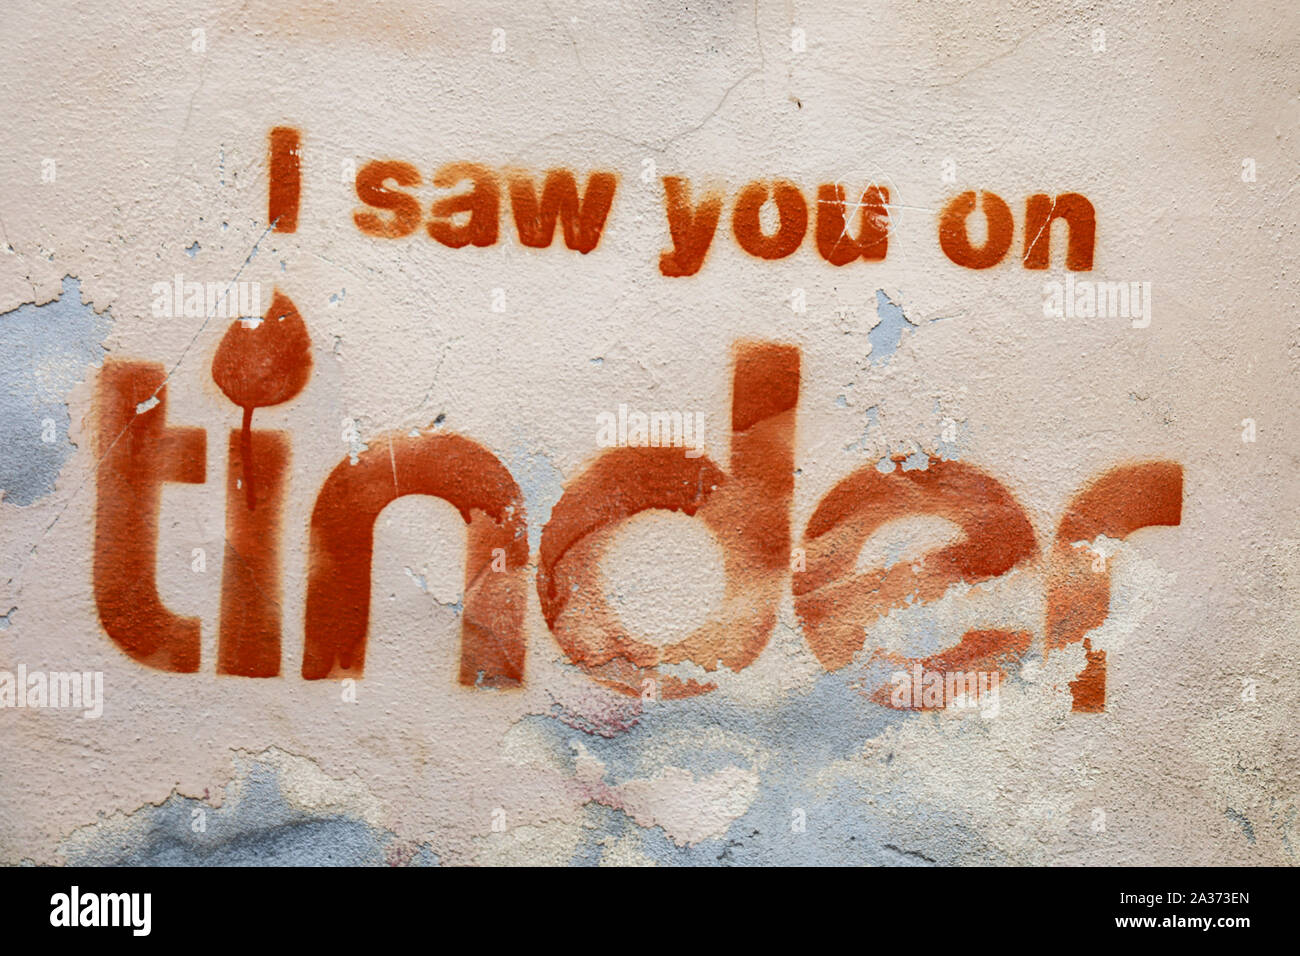 I saw you on tinder - stencil art in Trastevere district of Rome, Italy Stock Photo